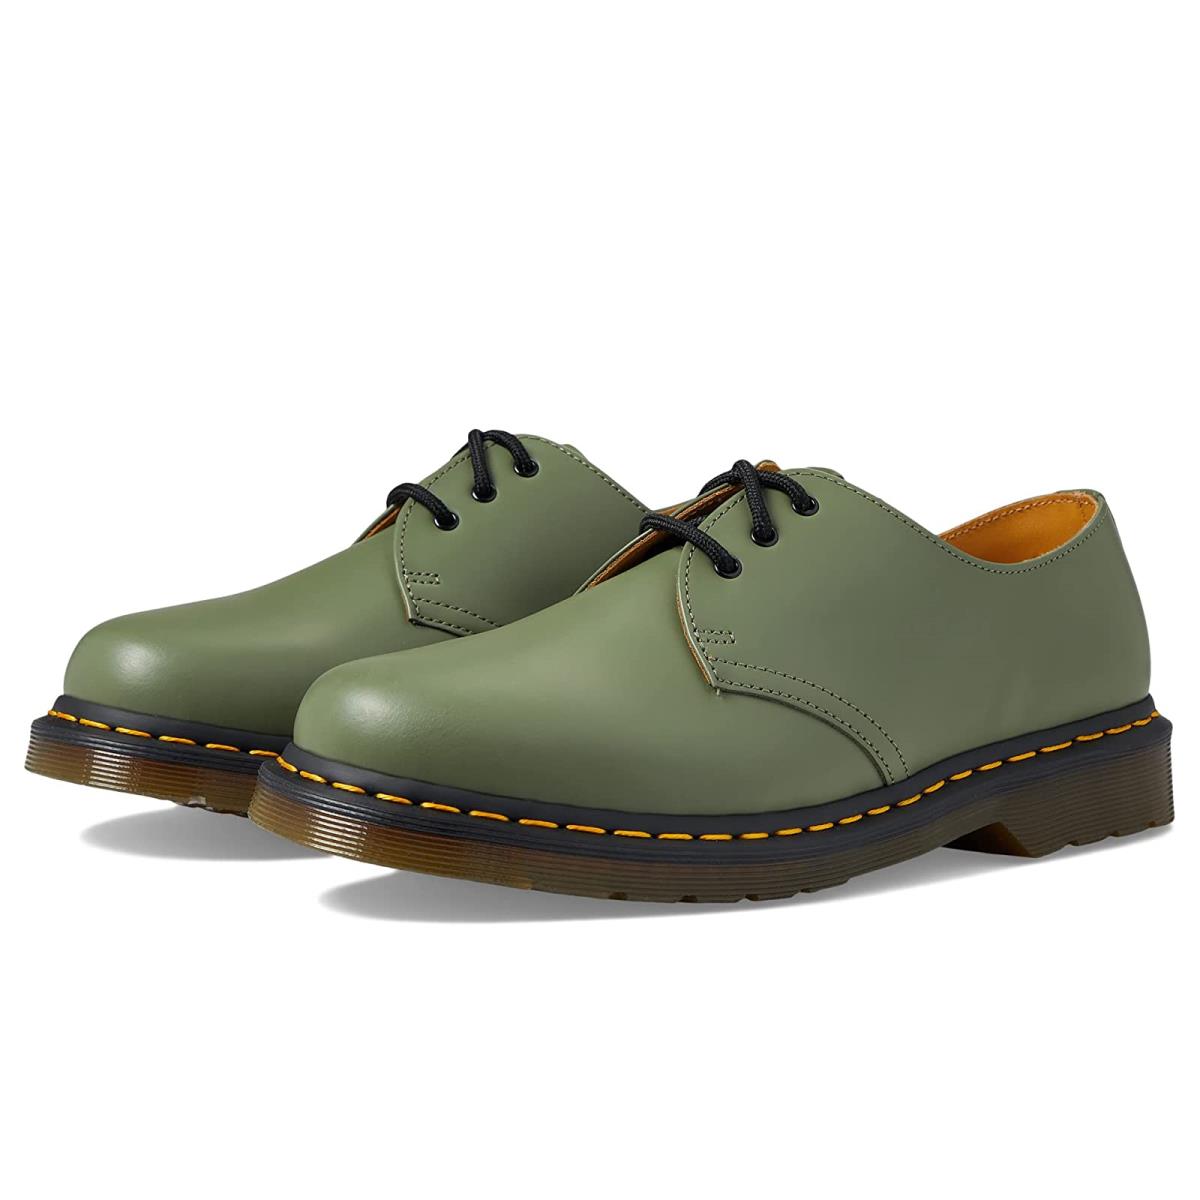 Unisex Oxfords Dr. Martens 1461 Smooth Leather Shoes Khaki Green Smooth